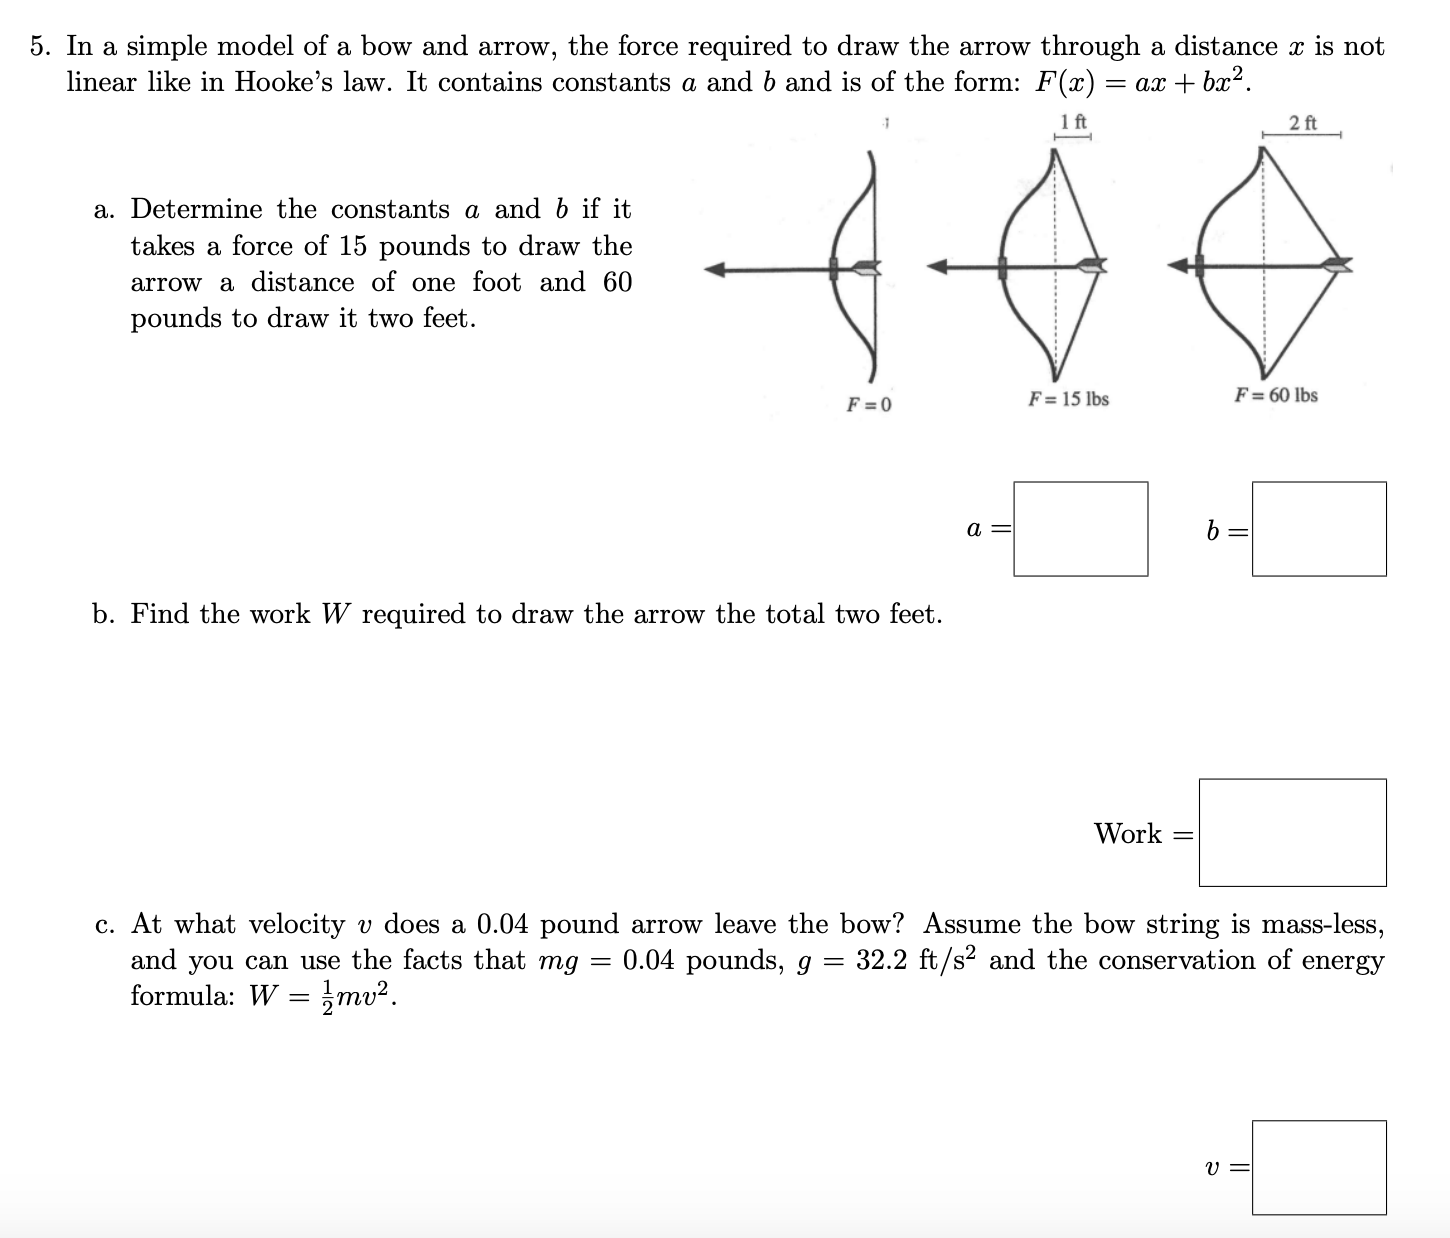 5. In a simple model of a bow and arrow, the force required to draw the arrow through a distance x is not
linear like in Hooke's law. It contains constants a and b and is of the form: F(x) = ax + bx².
1 ft
2 ft
a. Determine the constants a and b if it
takes a force of 15 pounds to draw the
arrow a distance of one foot and 60
pounds to draw it two feet.
F = 0
F = 15 lbs
F = 60 lbs
a
b. Find the work W required to draw the arrow the total two feet.
Work =
c. At what velocity v does a 0.04 pound arrow leave the bow? Assume the bow string is mass-less,
and you can use the facts that mg
formula: W
0.04 pounds, g = 32.2 ft/s and the conservation of
energy
mv².
U 3=
